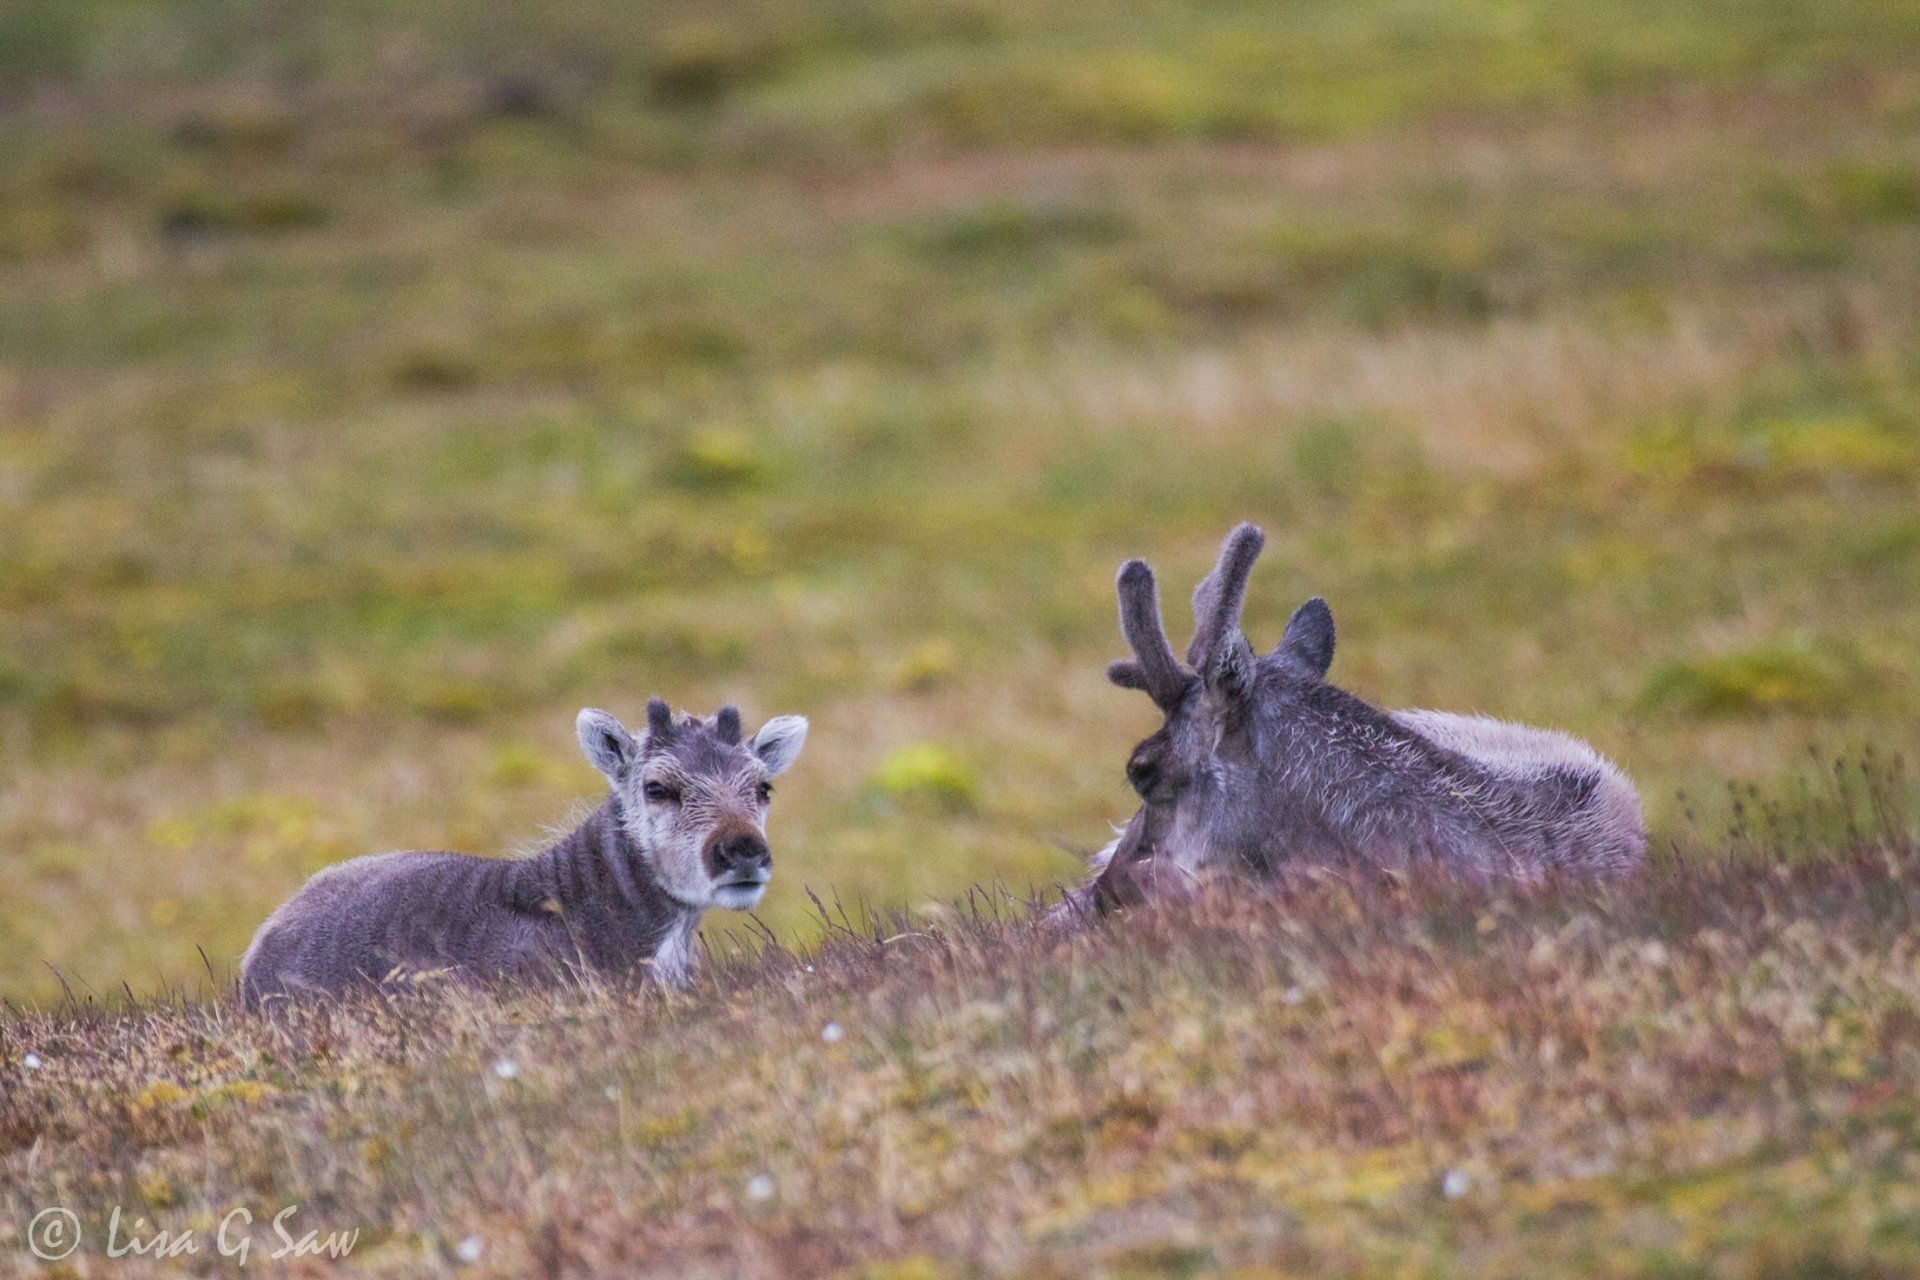 Two Reindeer lying on ground, juvenile with adult